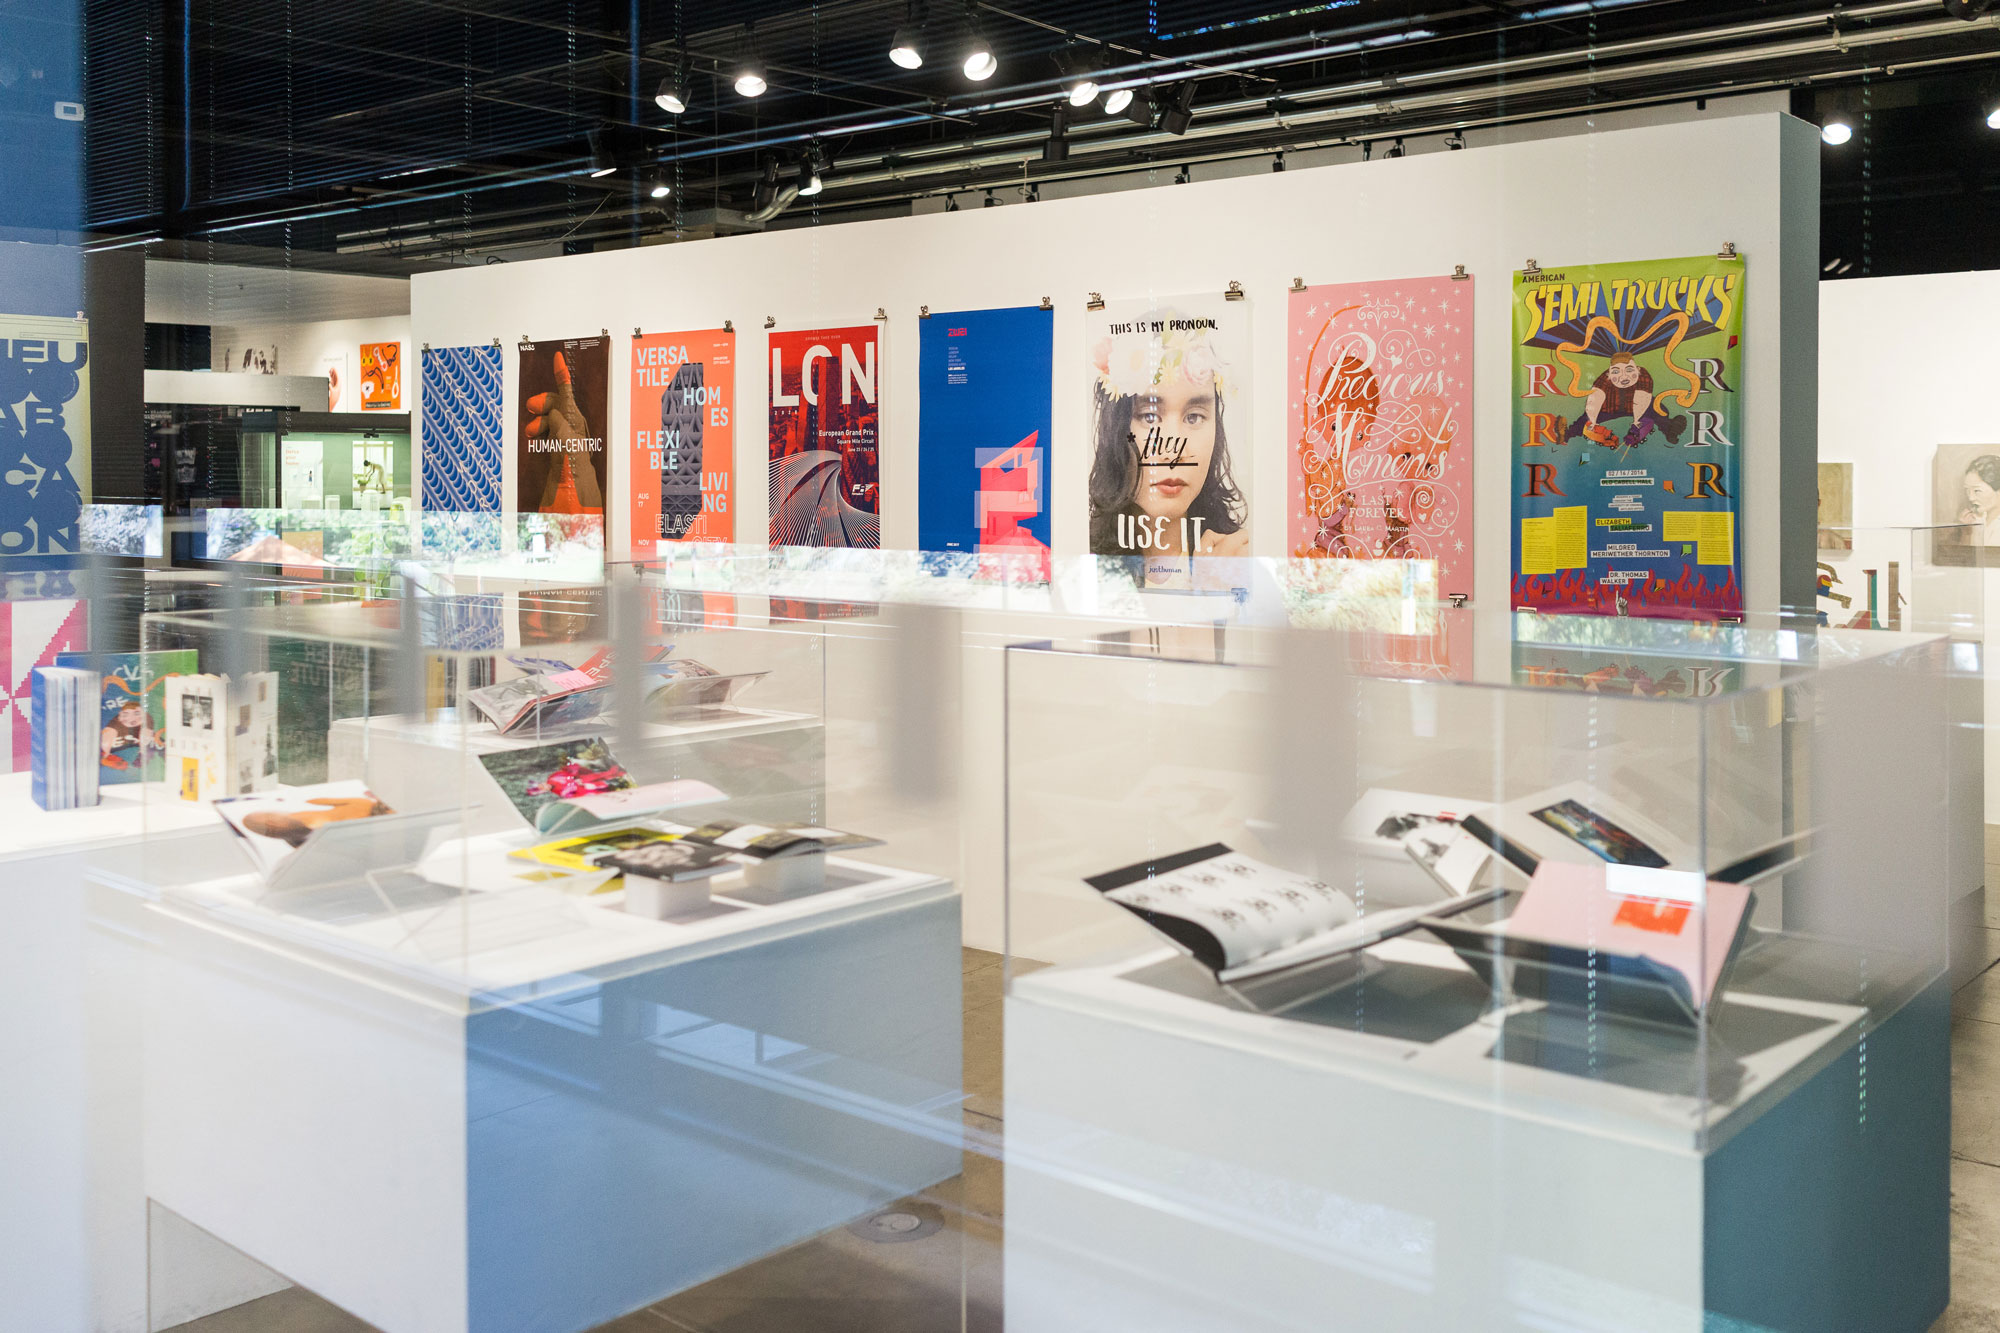 Image of Student Gallery located at the main entrance of the Ellwood building at ArtCenter College of Design